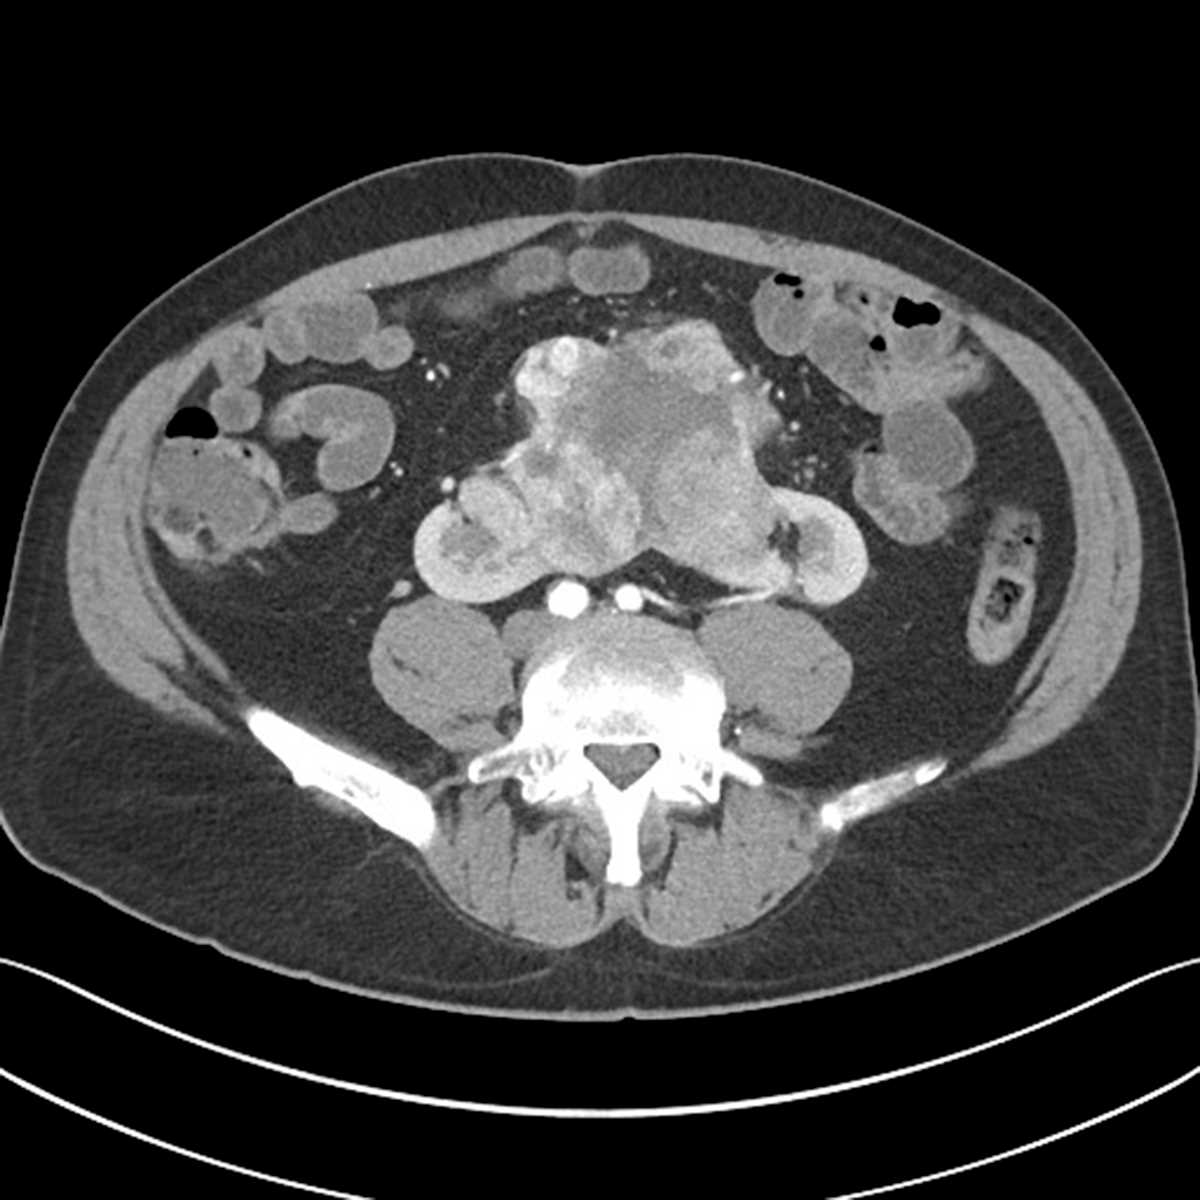 Renal Cell Carcinoma in Horseshoe Kidney - CTisus CT Scan